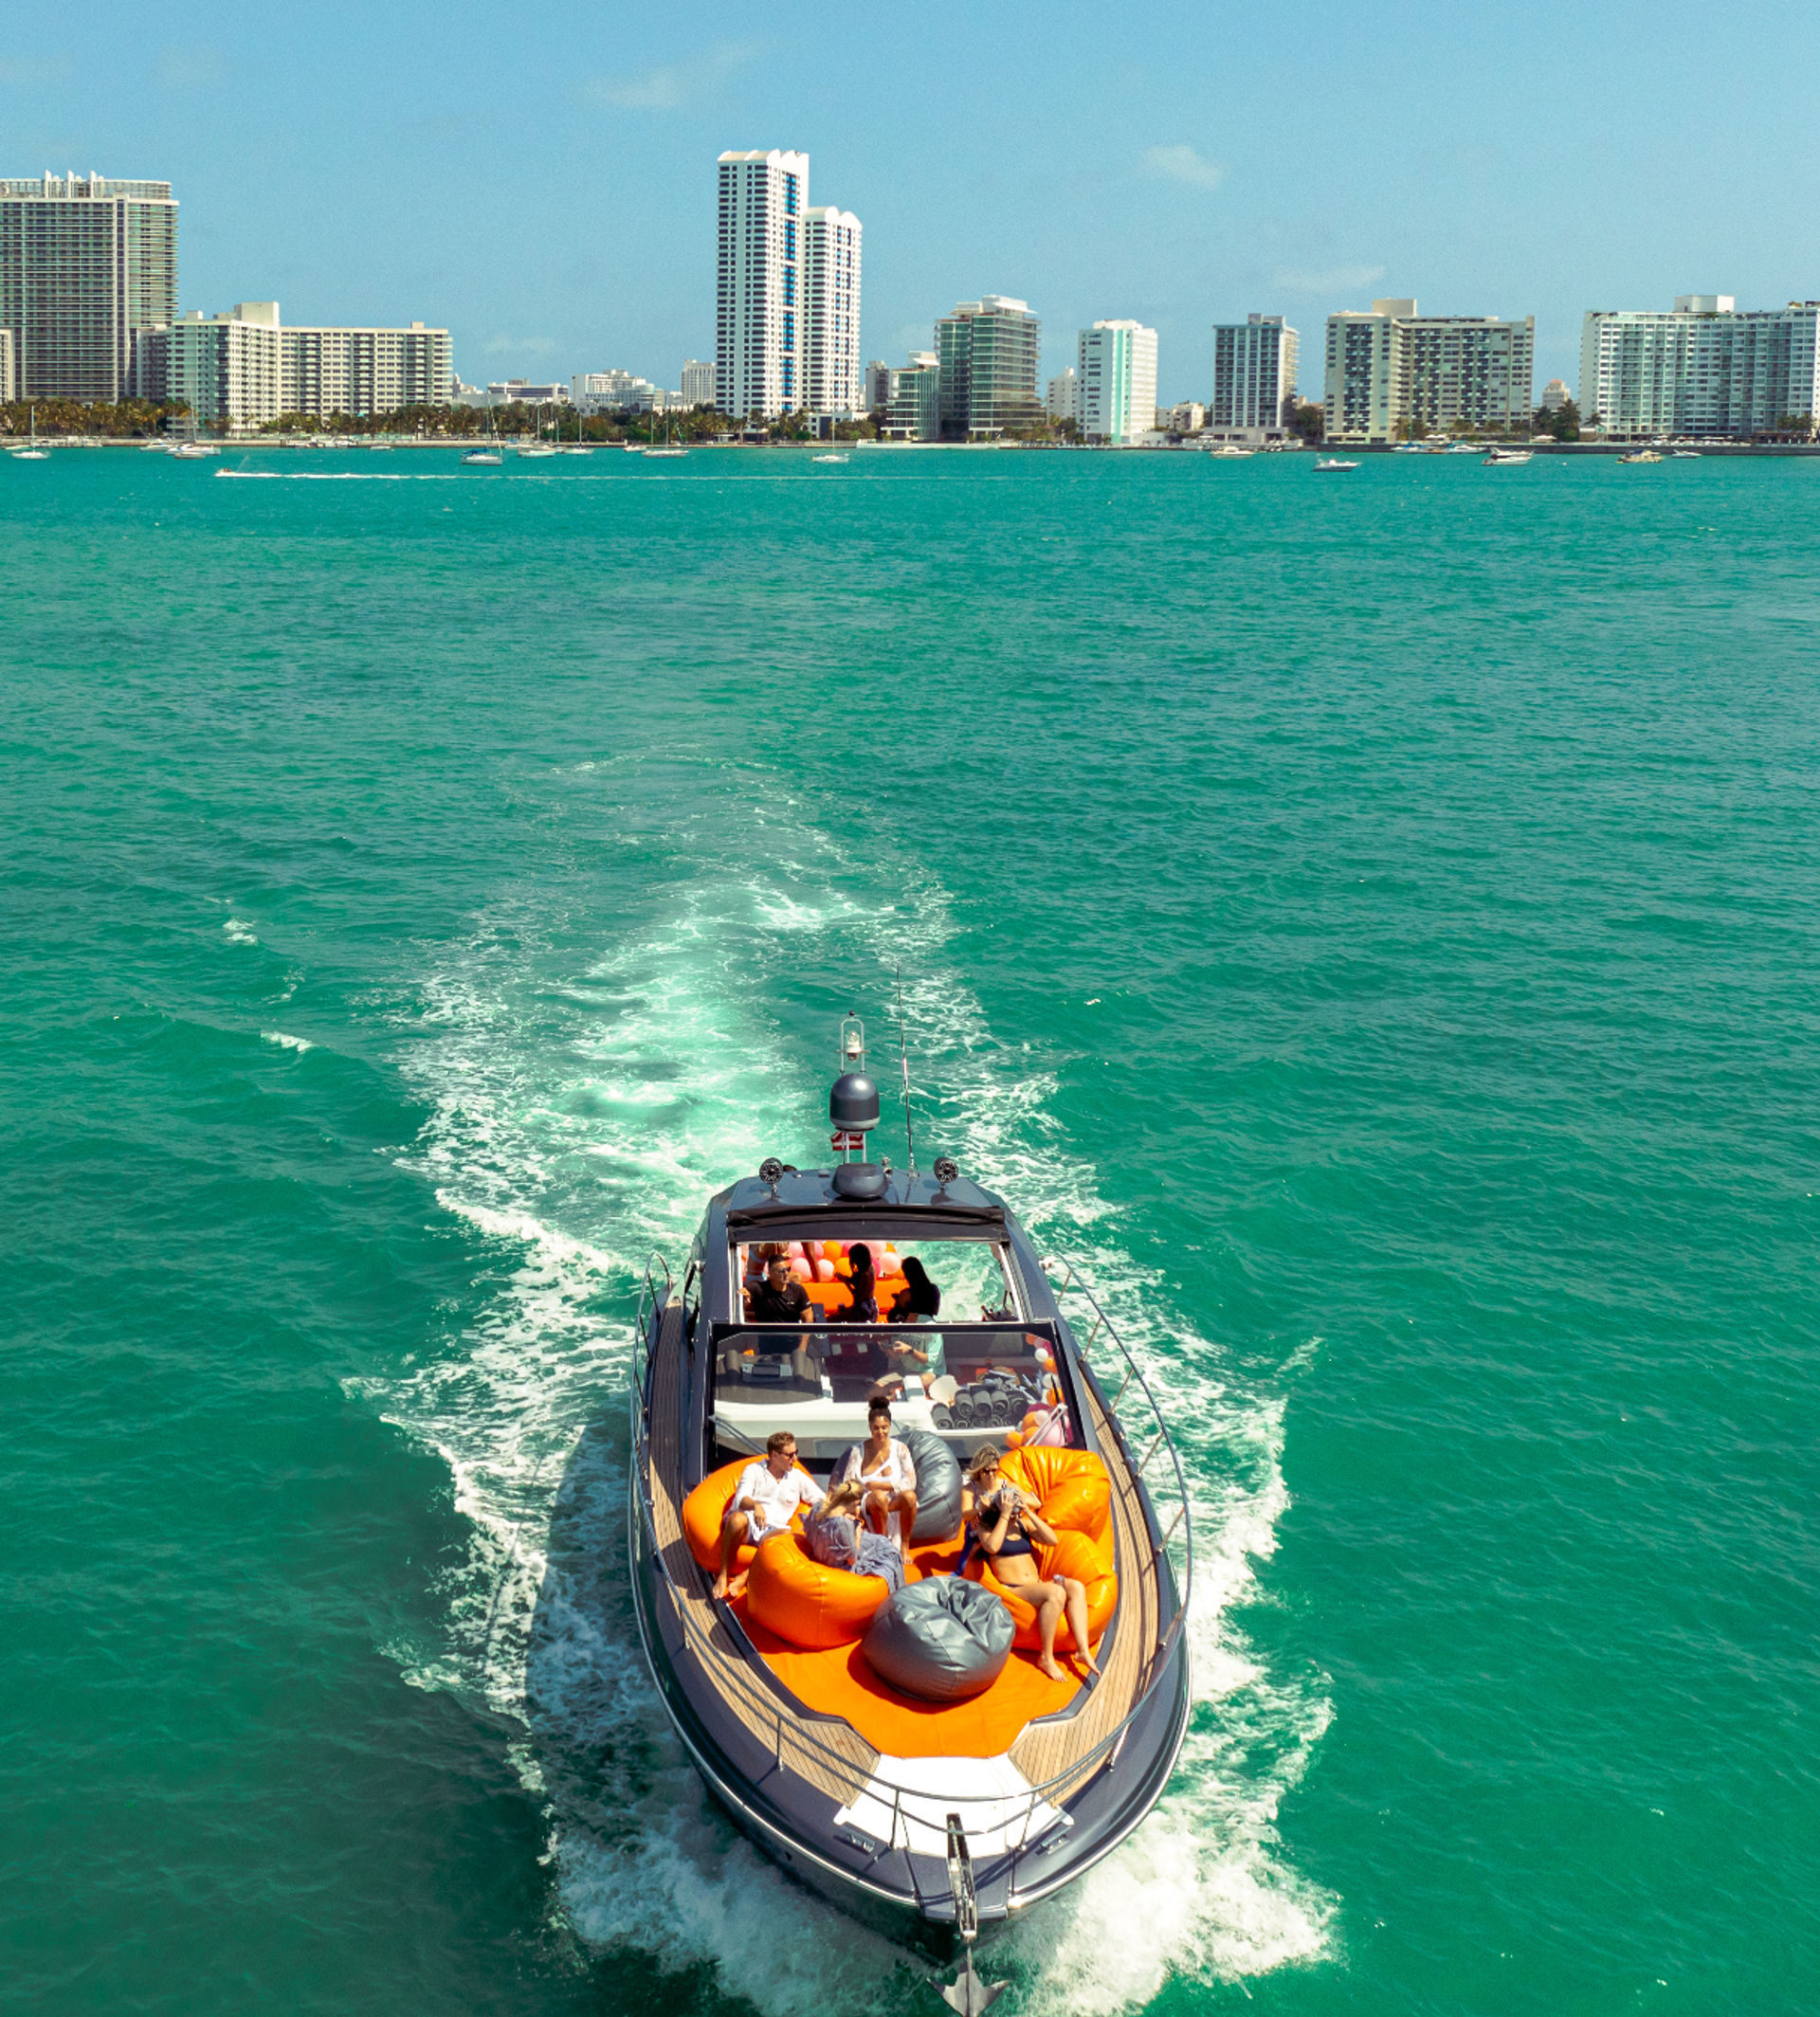 Premium Private Yacht Party for 2-6 Hours: Pristine Miami Cruise with Captain and Champagne, BYOB Optional image 7